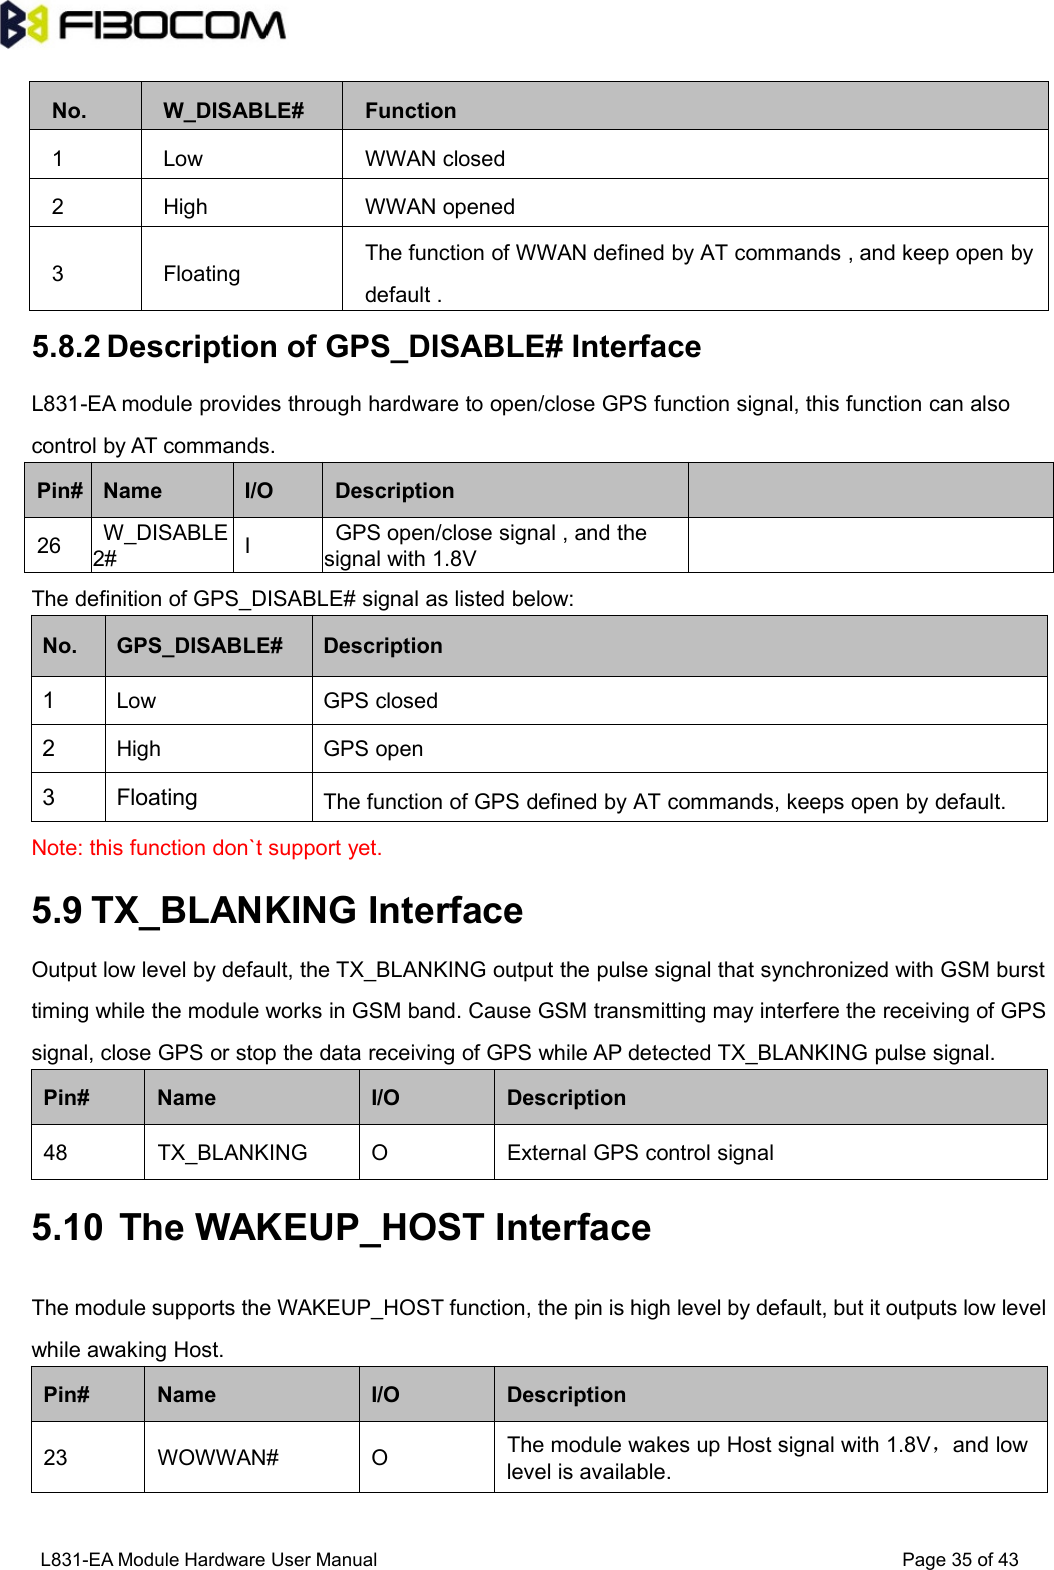 L831-EA Module Hardware User Manual Page35of435.8.2 Description of GPS_DISABLE# InterfaceL831-EA module provides through hardware to open/close GPS function signal, this function can alsocontrol by AT commands.Pin#NameI/ODescription26W_DISABLE2#IGPS open/close signal , and thesignal with 1.8VThe definition of GPS_DISABLE# signal as listed below:No.GPS_DISABLE#Description1LowGPS closed2HighGPS open3FloatingThe function of GPS defined by AT commands, keeps open by default.Note: this function don`t support yet.5.9 TX_BLANKING InterfaceOutput low level by default, the TX_BLANKING output the pulse signal that synchronized with GSM bursttiming while the module works in GSM band. Cause GSM transmitting may interfere the receiving of GPSsignal, close GPS or stop the data receiving of GPS while AP detected TX_BLANKING pulse signal.Pin#NameI/ODescription48TX_BLANKINGOExternal GPS control signal5.10 The WAKEUP_HOST InterfaceThe module supports the WAKEUP_HOST function, the pin is high level by default, but it outputs low levelwhile awaking Host.Pin#NameI/ODescription23WOWWAN#OThe module wakes up Host signal with 1.8V，and lowlevel is available.No.W_DISABLE#Function1LowWWAN closed2HighWWAN opened3FloatingThe function of WWAN defined by AT commands , and keep open bydefault .